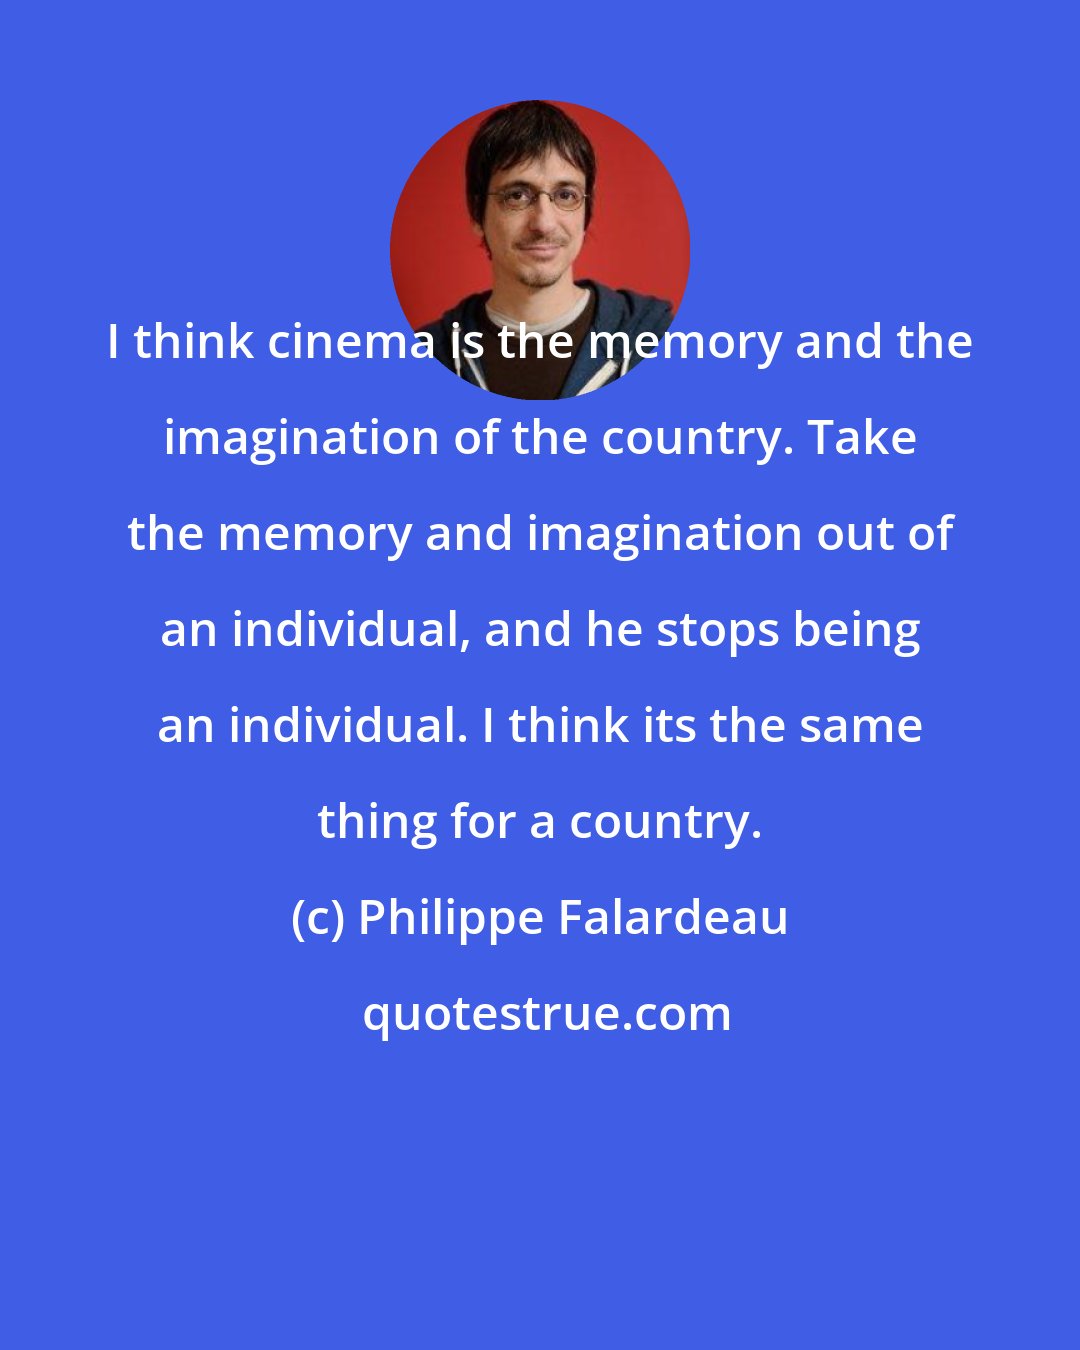 Philippe Falardeau: I think cinema is the memory and the imagination of the country. Take the memory and imagination out of an individual, and he stops being an individual. I think its the same thing for a country.